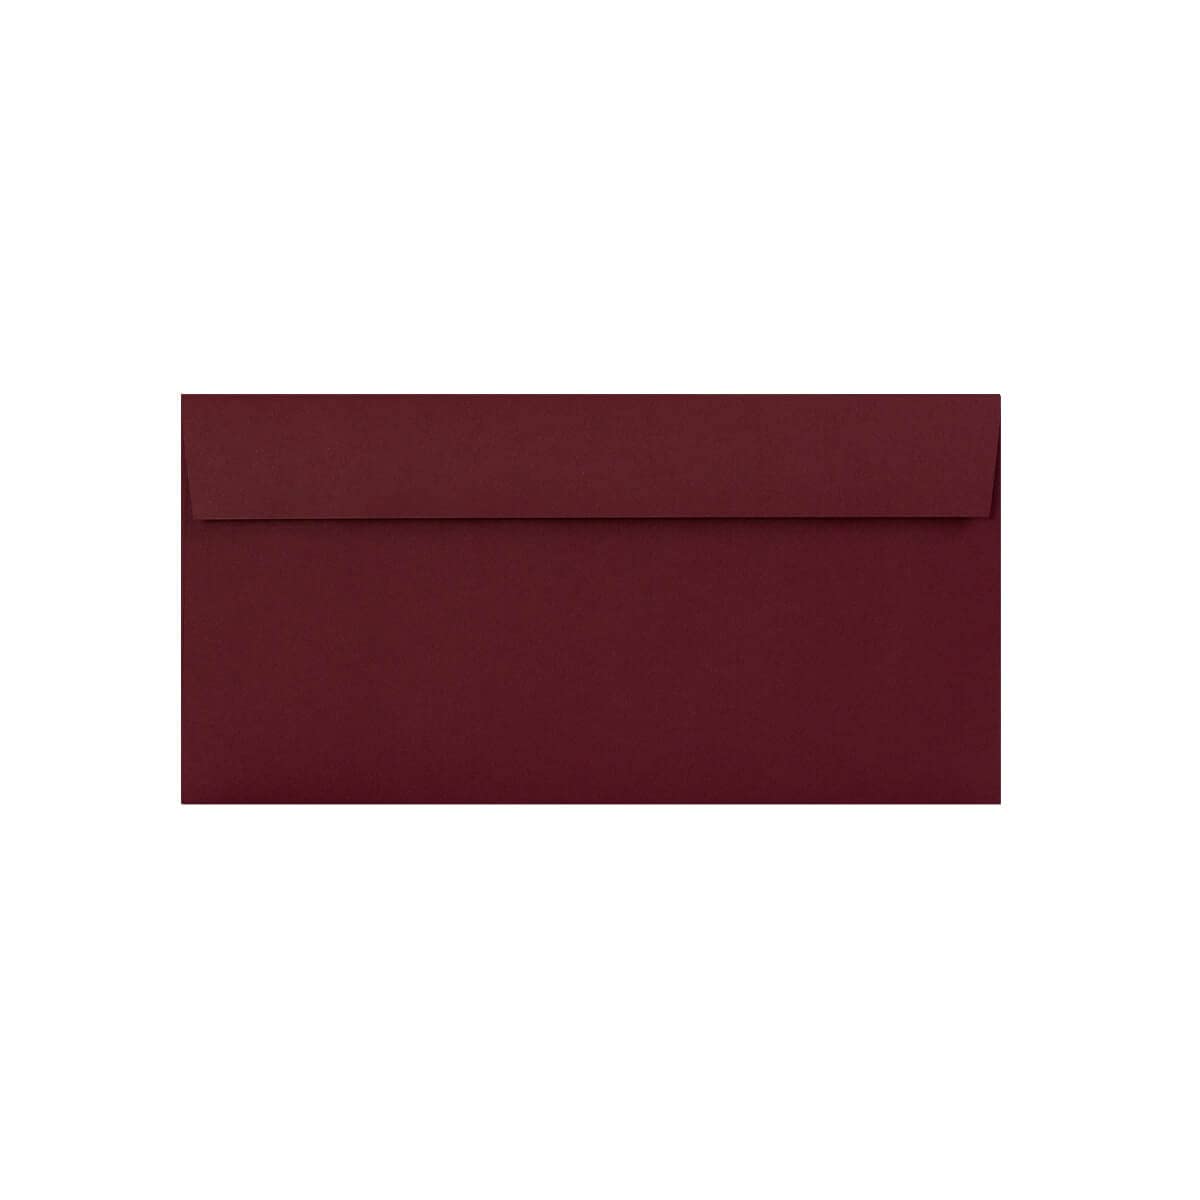 DL (110mm x 220mm) Coloured Envelopes Perfect for Christmas Cards, Greeting Cards, Wedding/Party Invitations, Crafts and Many More - Pack of 12 (Burgundy Peel and Seal)